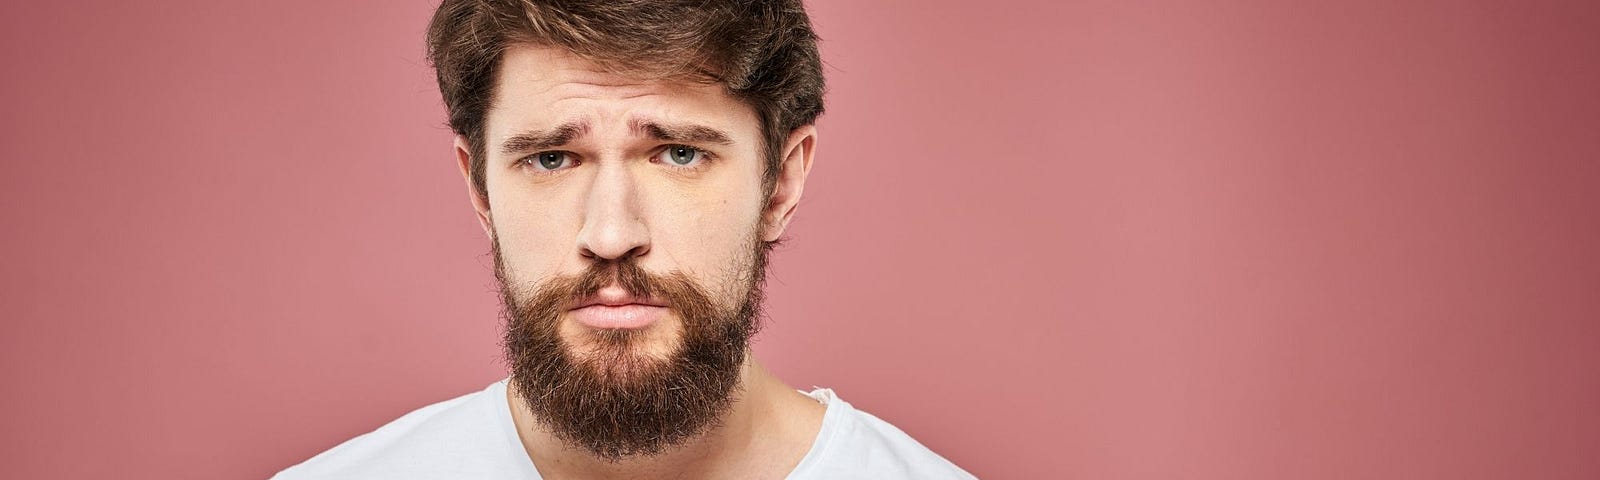 Gary, 25, with Hypersocial Disorder, Meets His Therapist — A Bearded Young Man with a Sad Expression on Pink Background